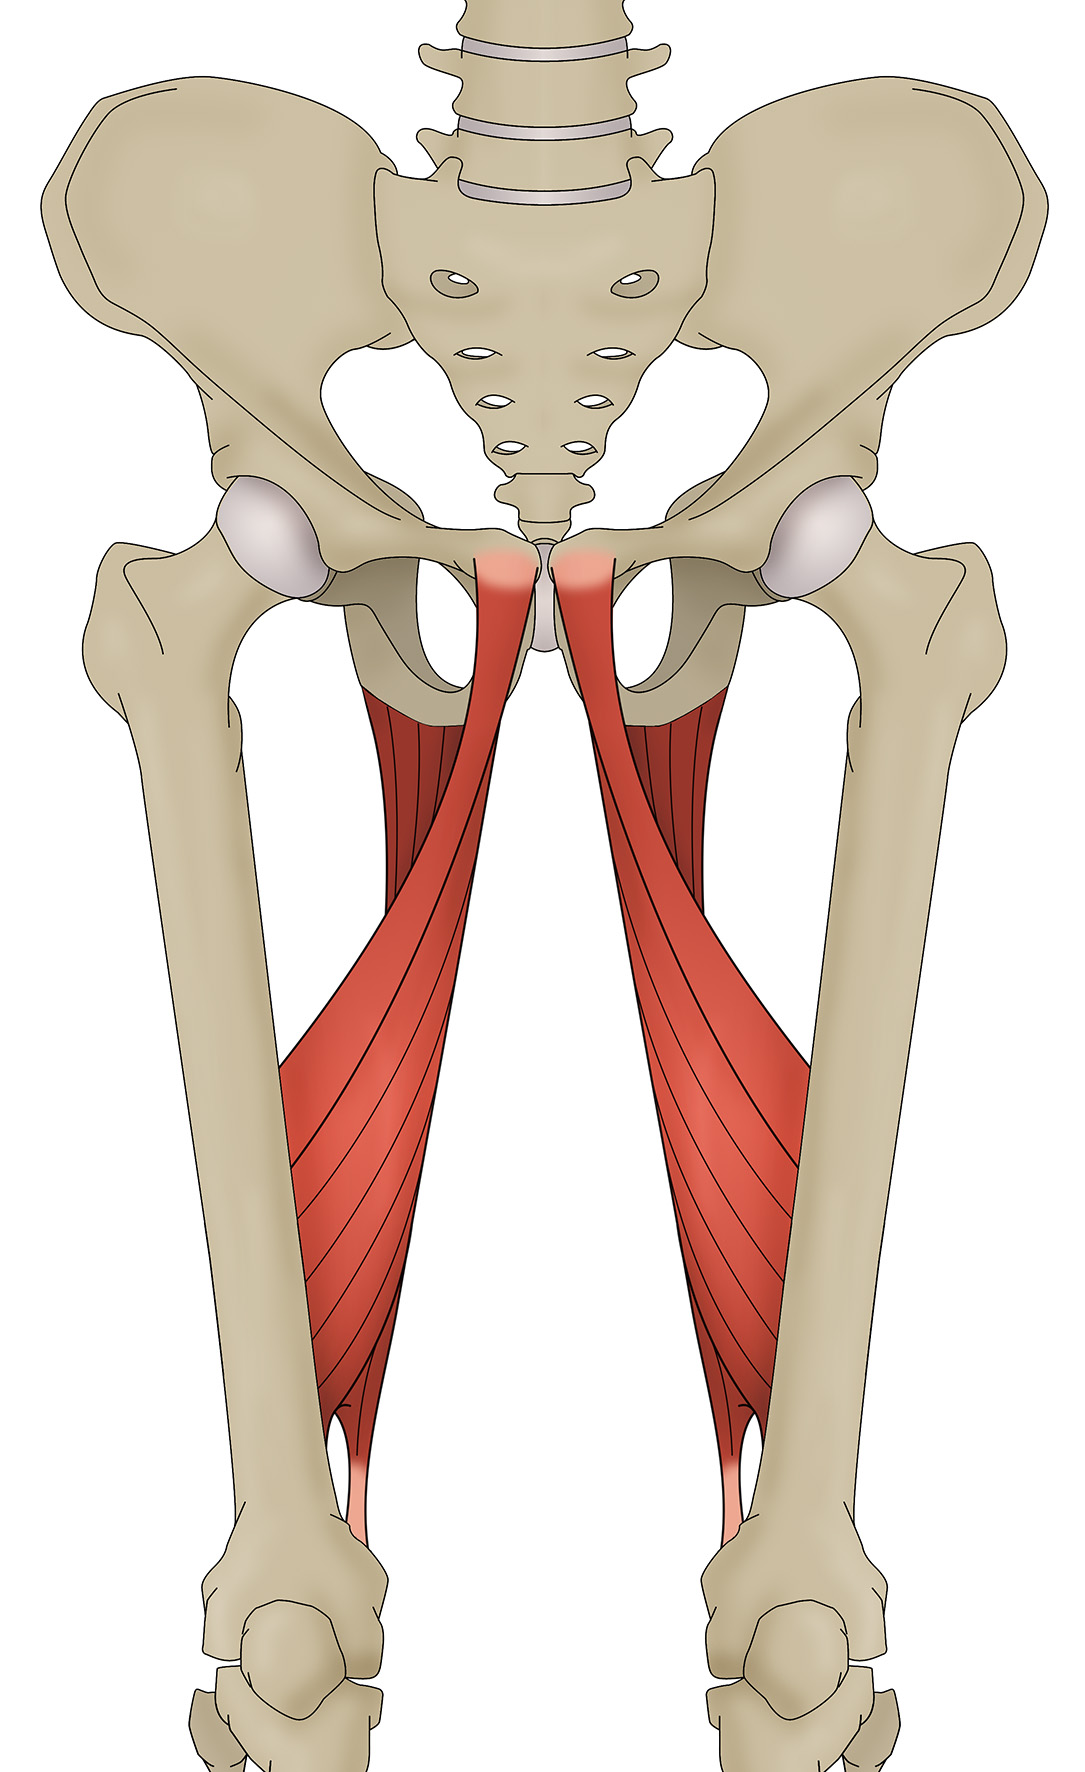 <p>I: Linea aspera and adductor tubercle of femur</p><p>F: dynamic stabilizer of the pelvis and femur as well as a prime mover of the femur into adduction</p>